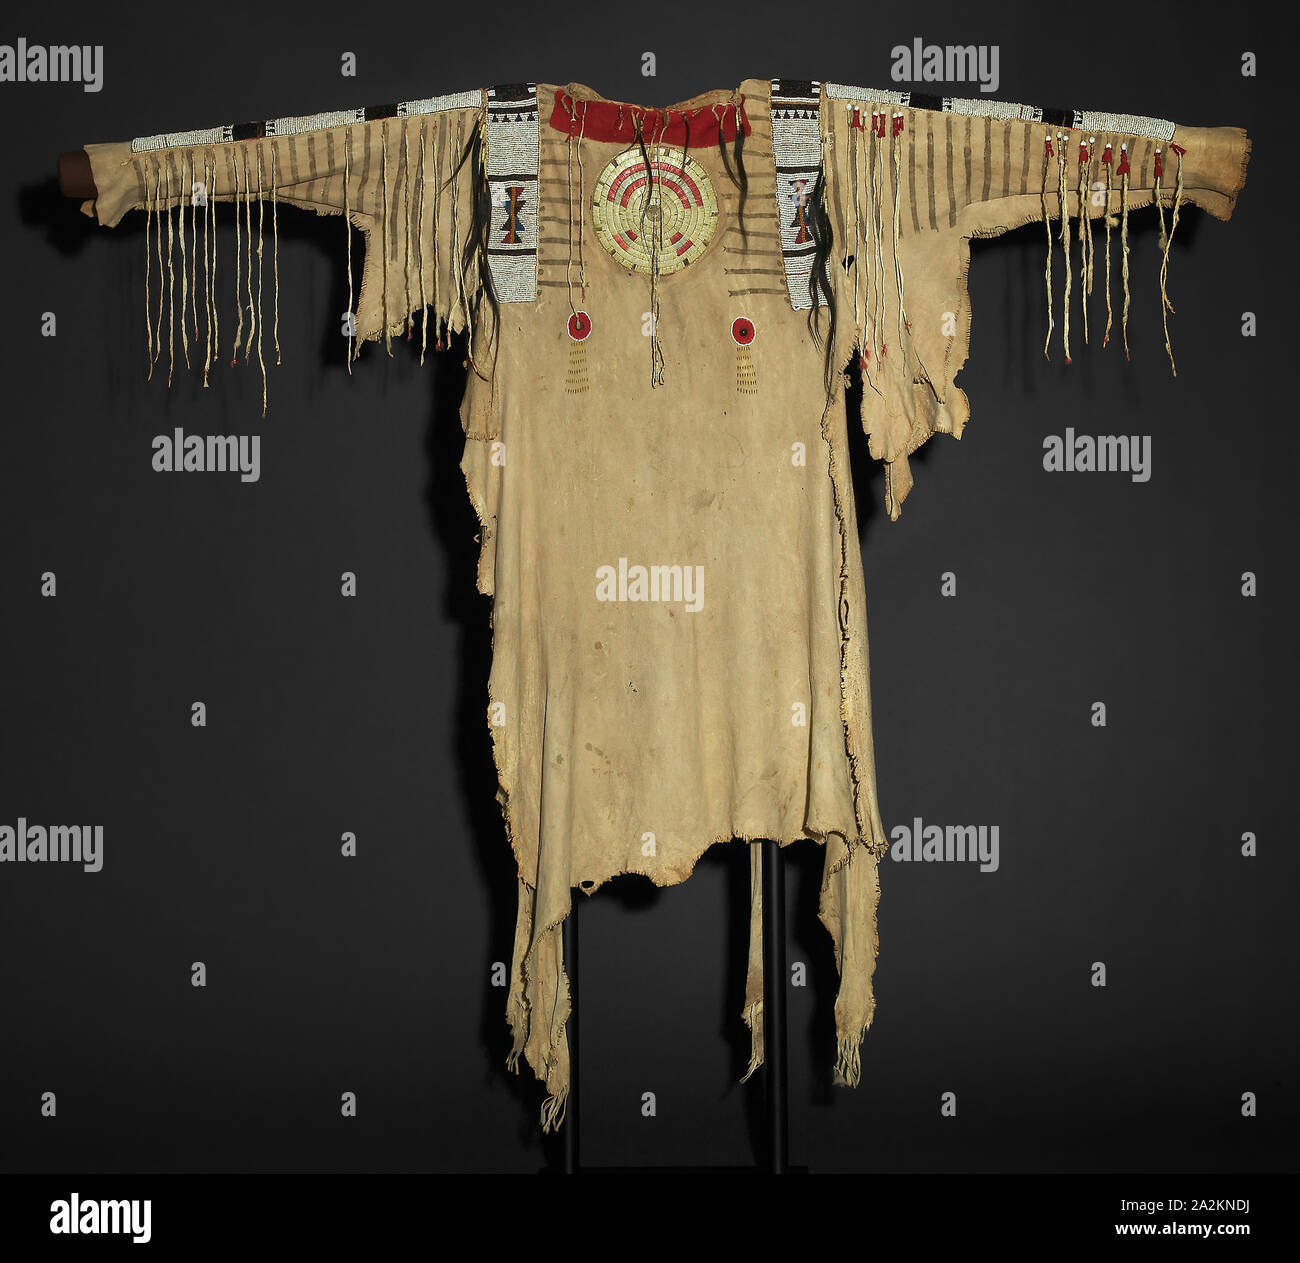 War Shirt, 1830/40, Upper Missouri River Tribe, Missouri, United States, Missouri, Deer hide, ermine tails, glass pony beads, hair, porcupine quills, and trade cloth, Appro×. 101.6 × 50.8 cm (40 × 20 in Stock Photo